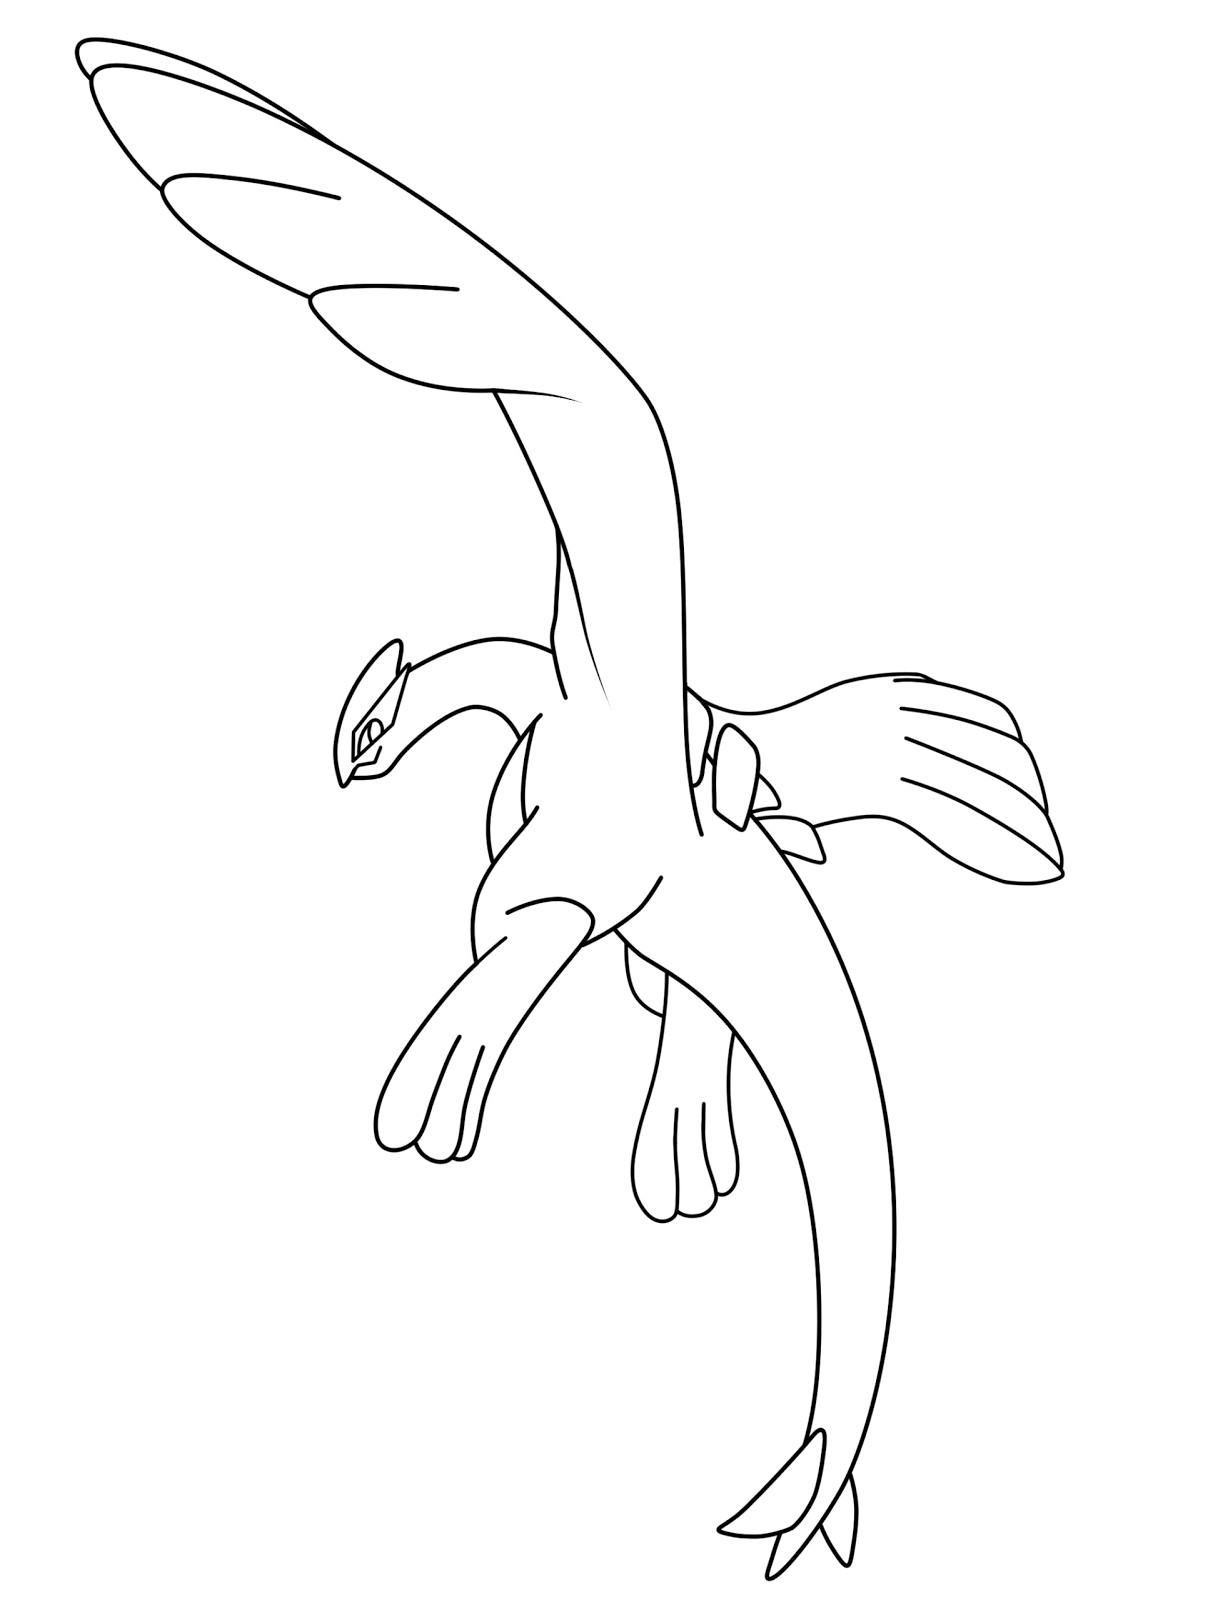 Pokemon Coloring Pages For Boys
 Pokemon Coloring Pages